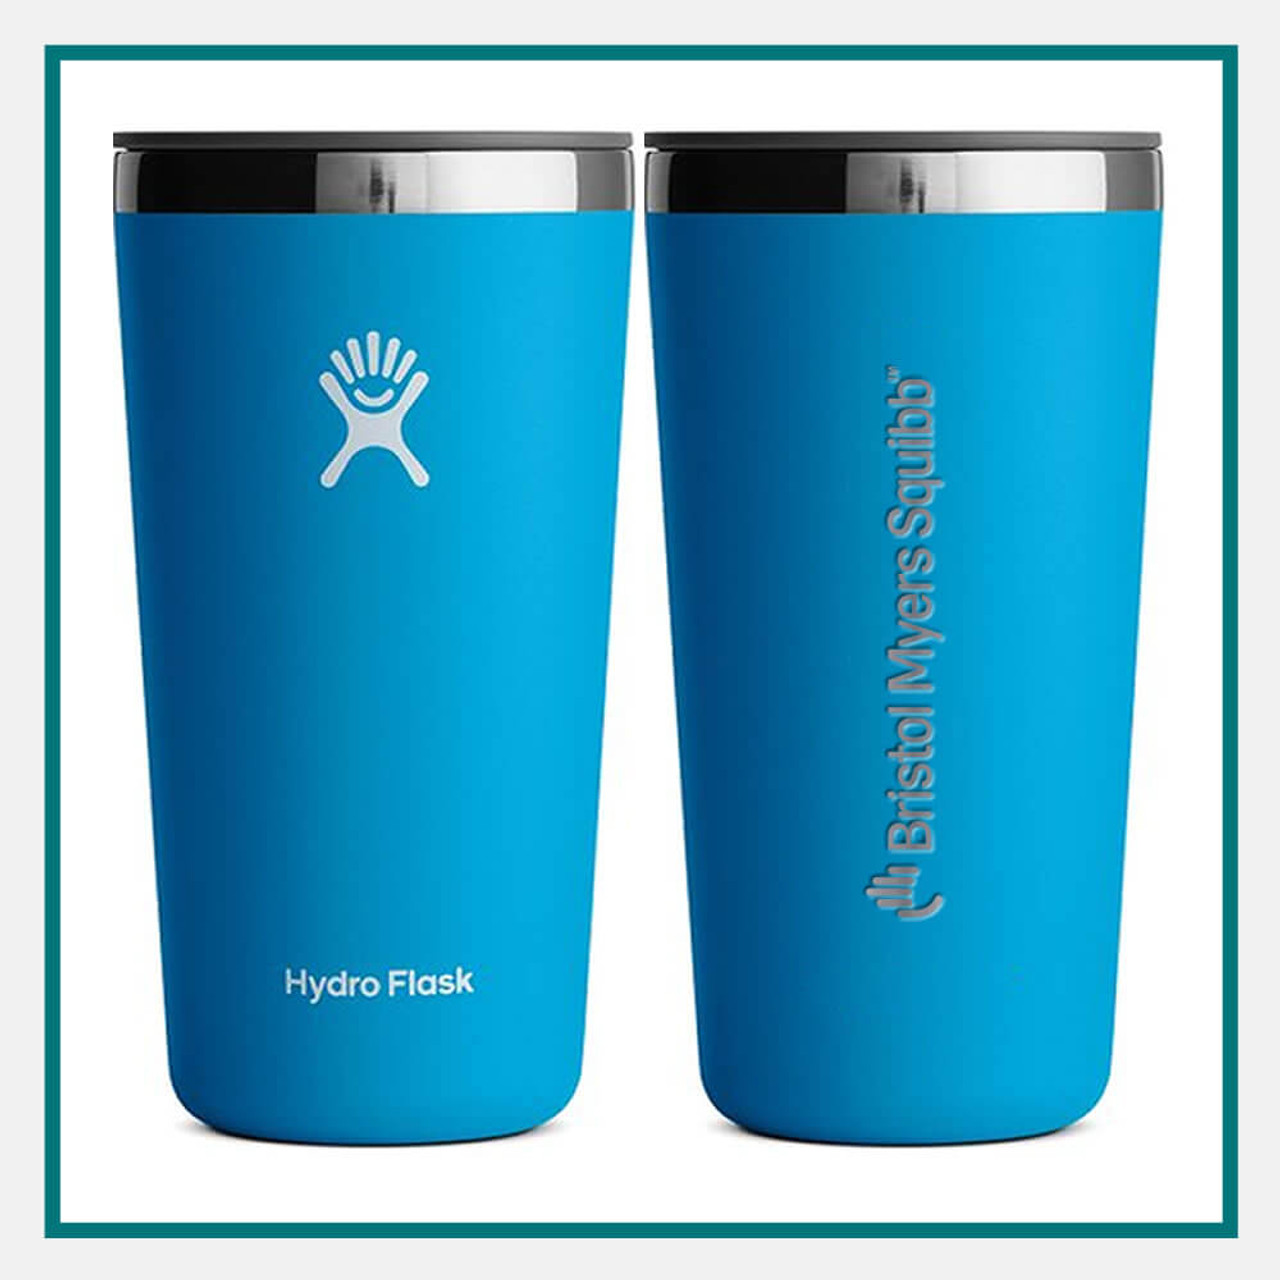 Hydro Flask 16 Oz Vacuum Insulated Tumbler - Pacific for sale